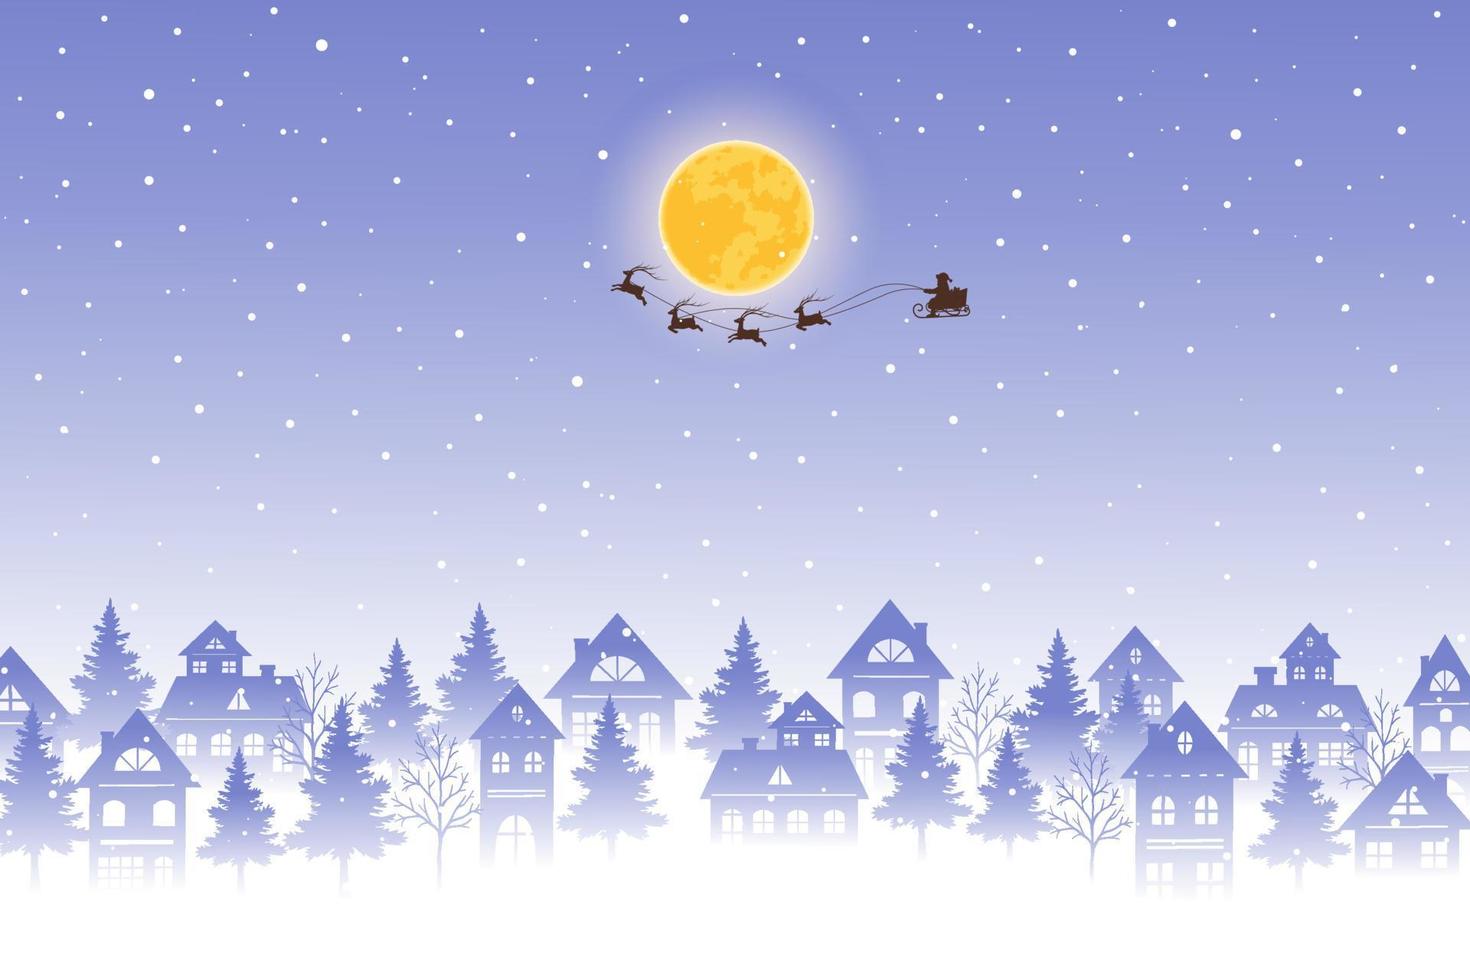 Santa Claus flying over rooftops with reindeers on winter night background vector